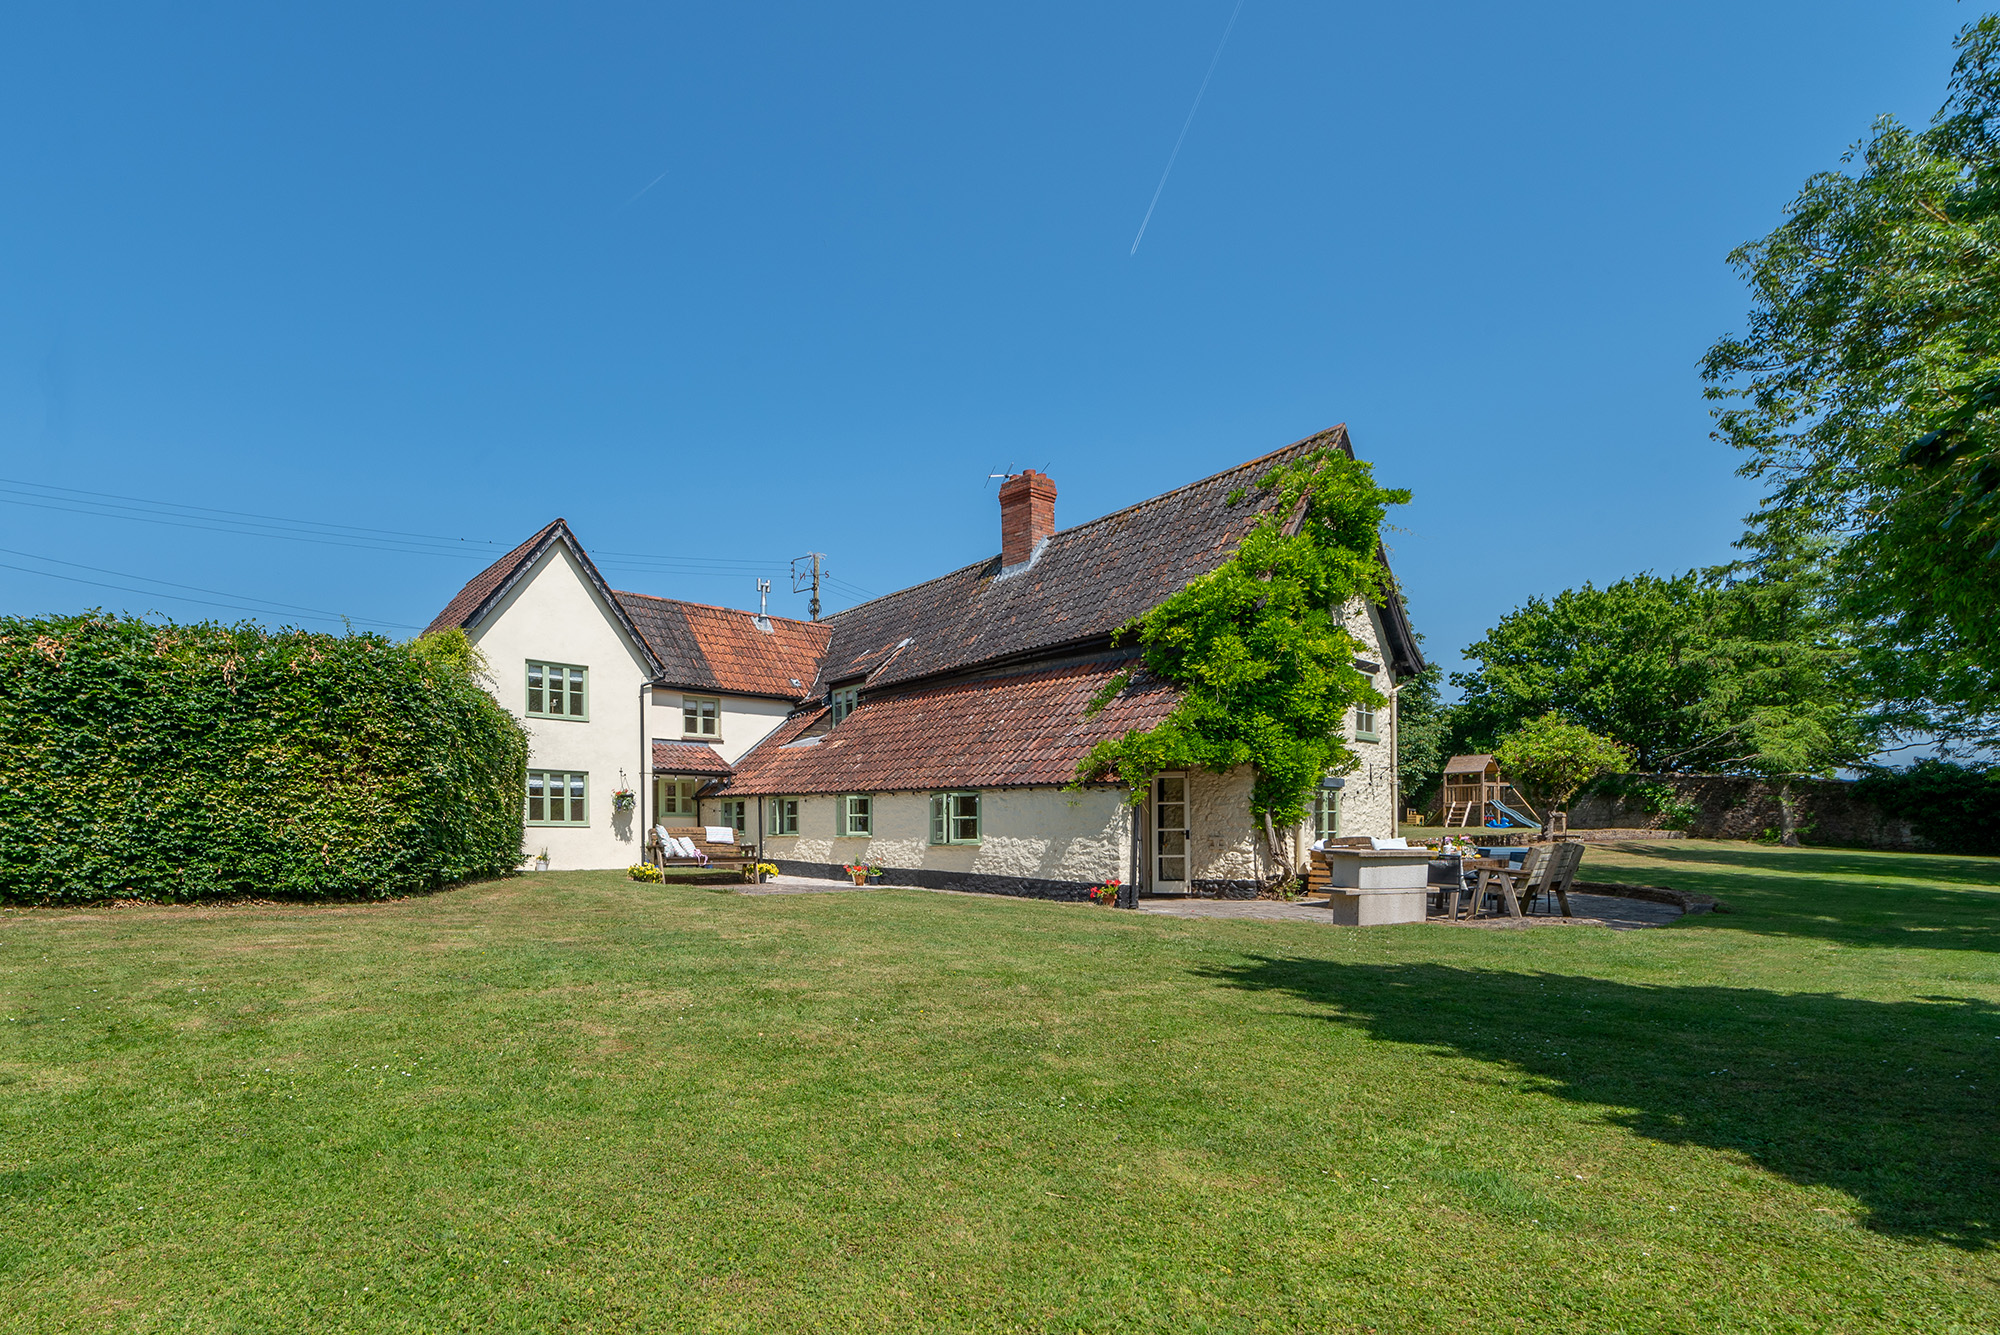 Cherry Tree Farmhouse - from the outside, surrounded by extensive gardens